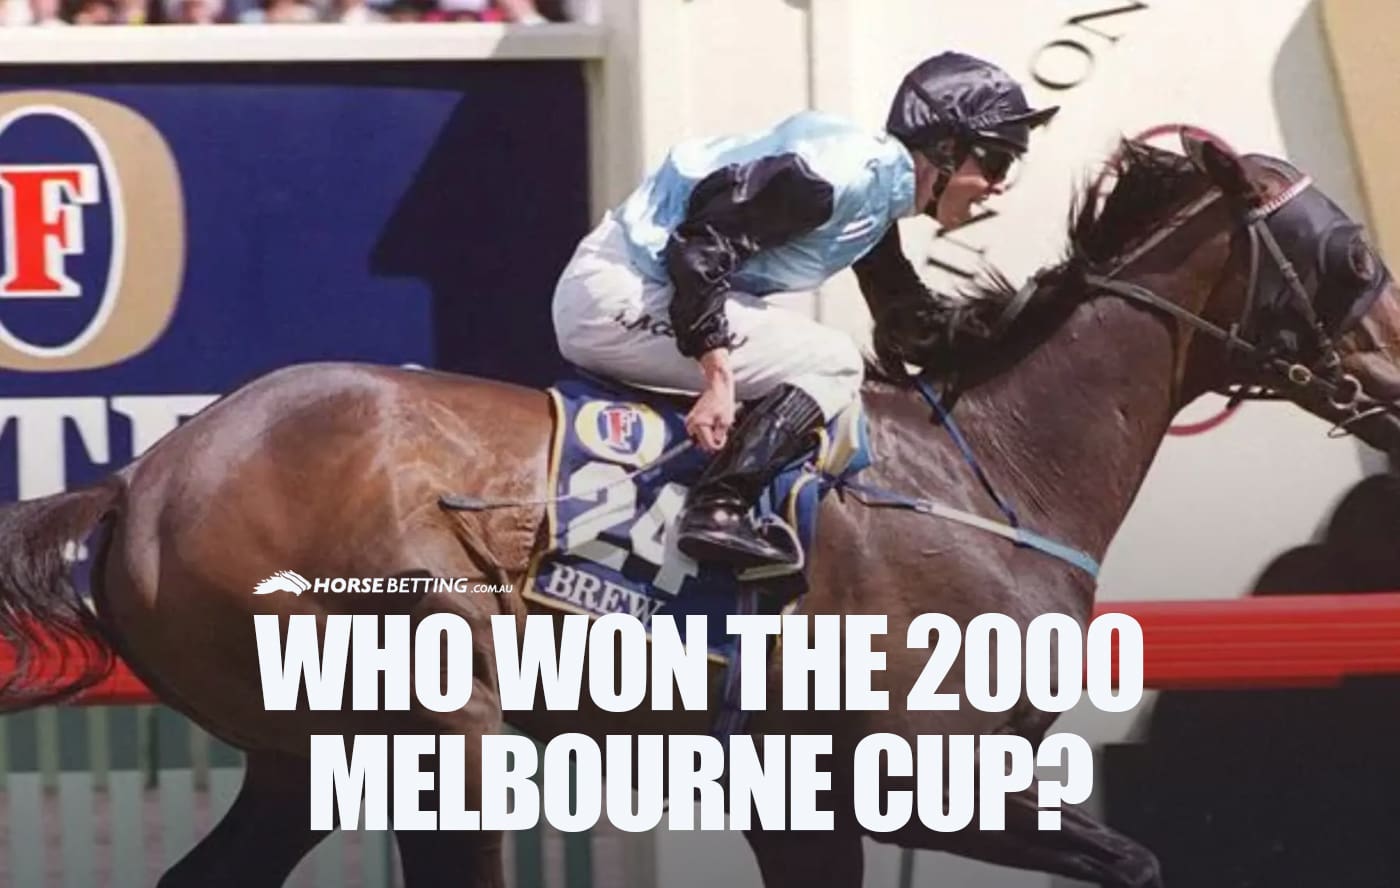 Who won the 2000 Melbourne Cup?